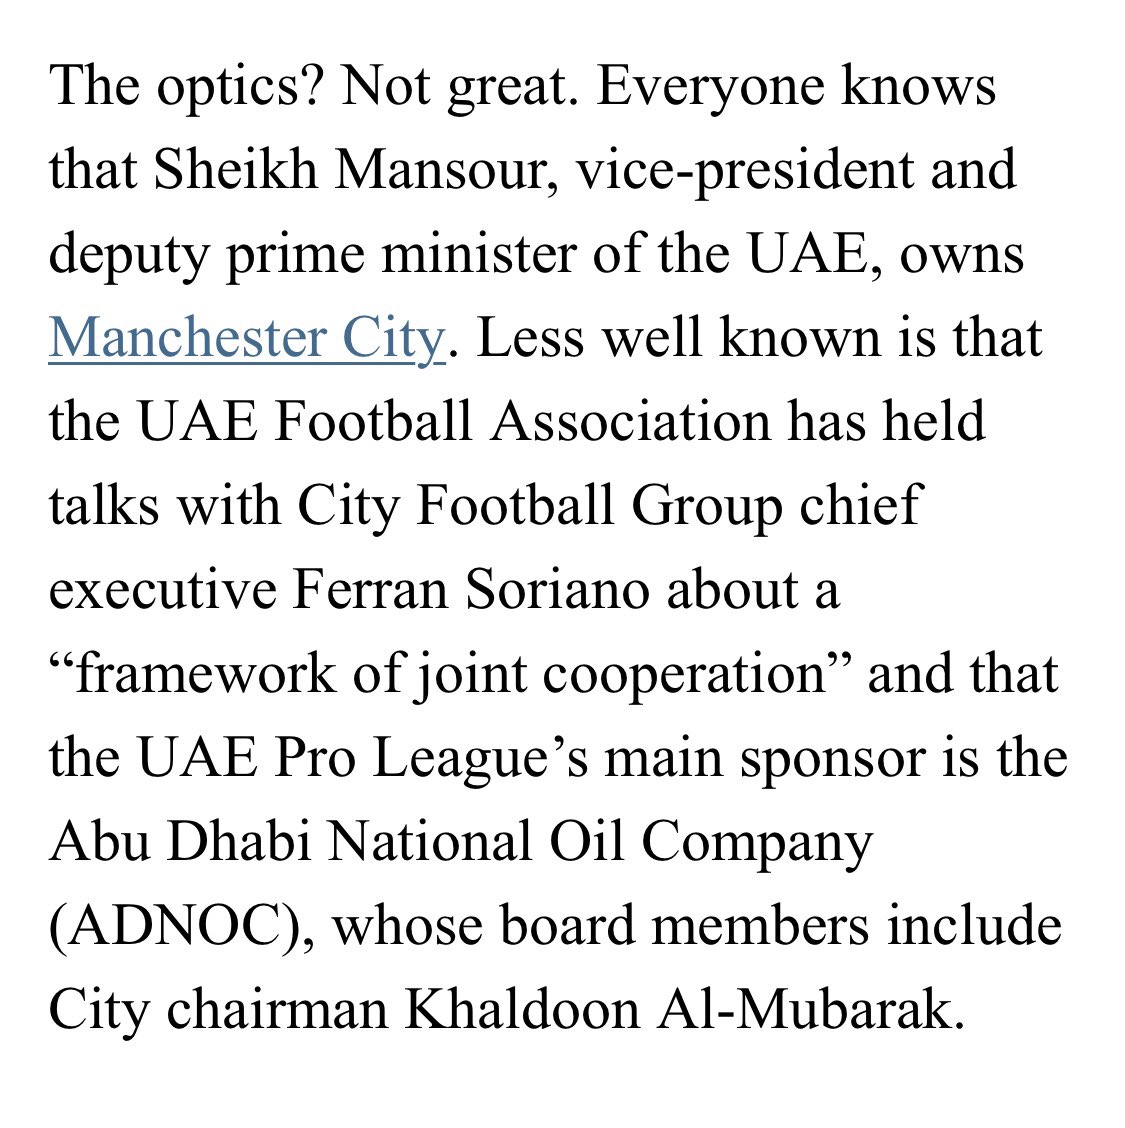 Michael Oliver, who refused to send Mateo Kovacic off for what was an obvious instance of two yellows (and possibly a straight red), recently travelled to the UAE to referee a game and was paid by the same people who own Manchester City. Offered without further comment.